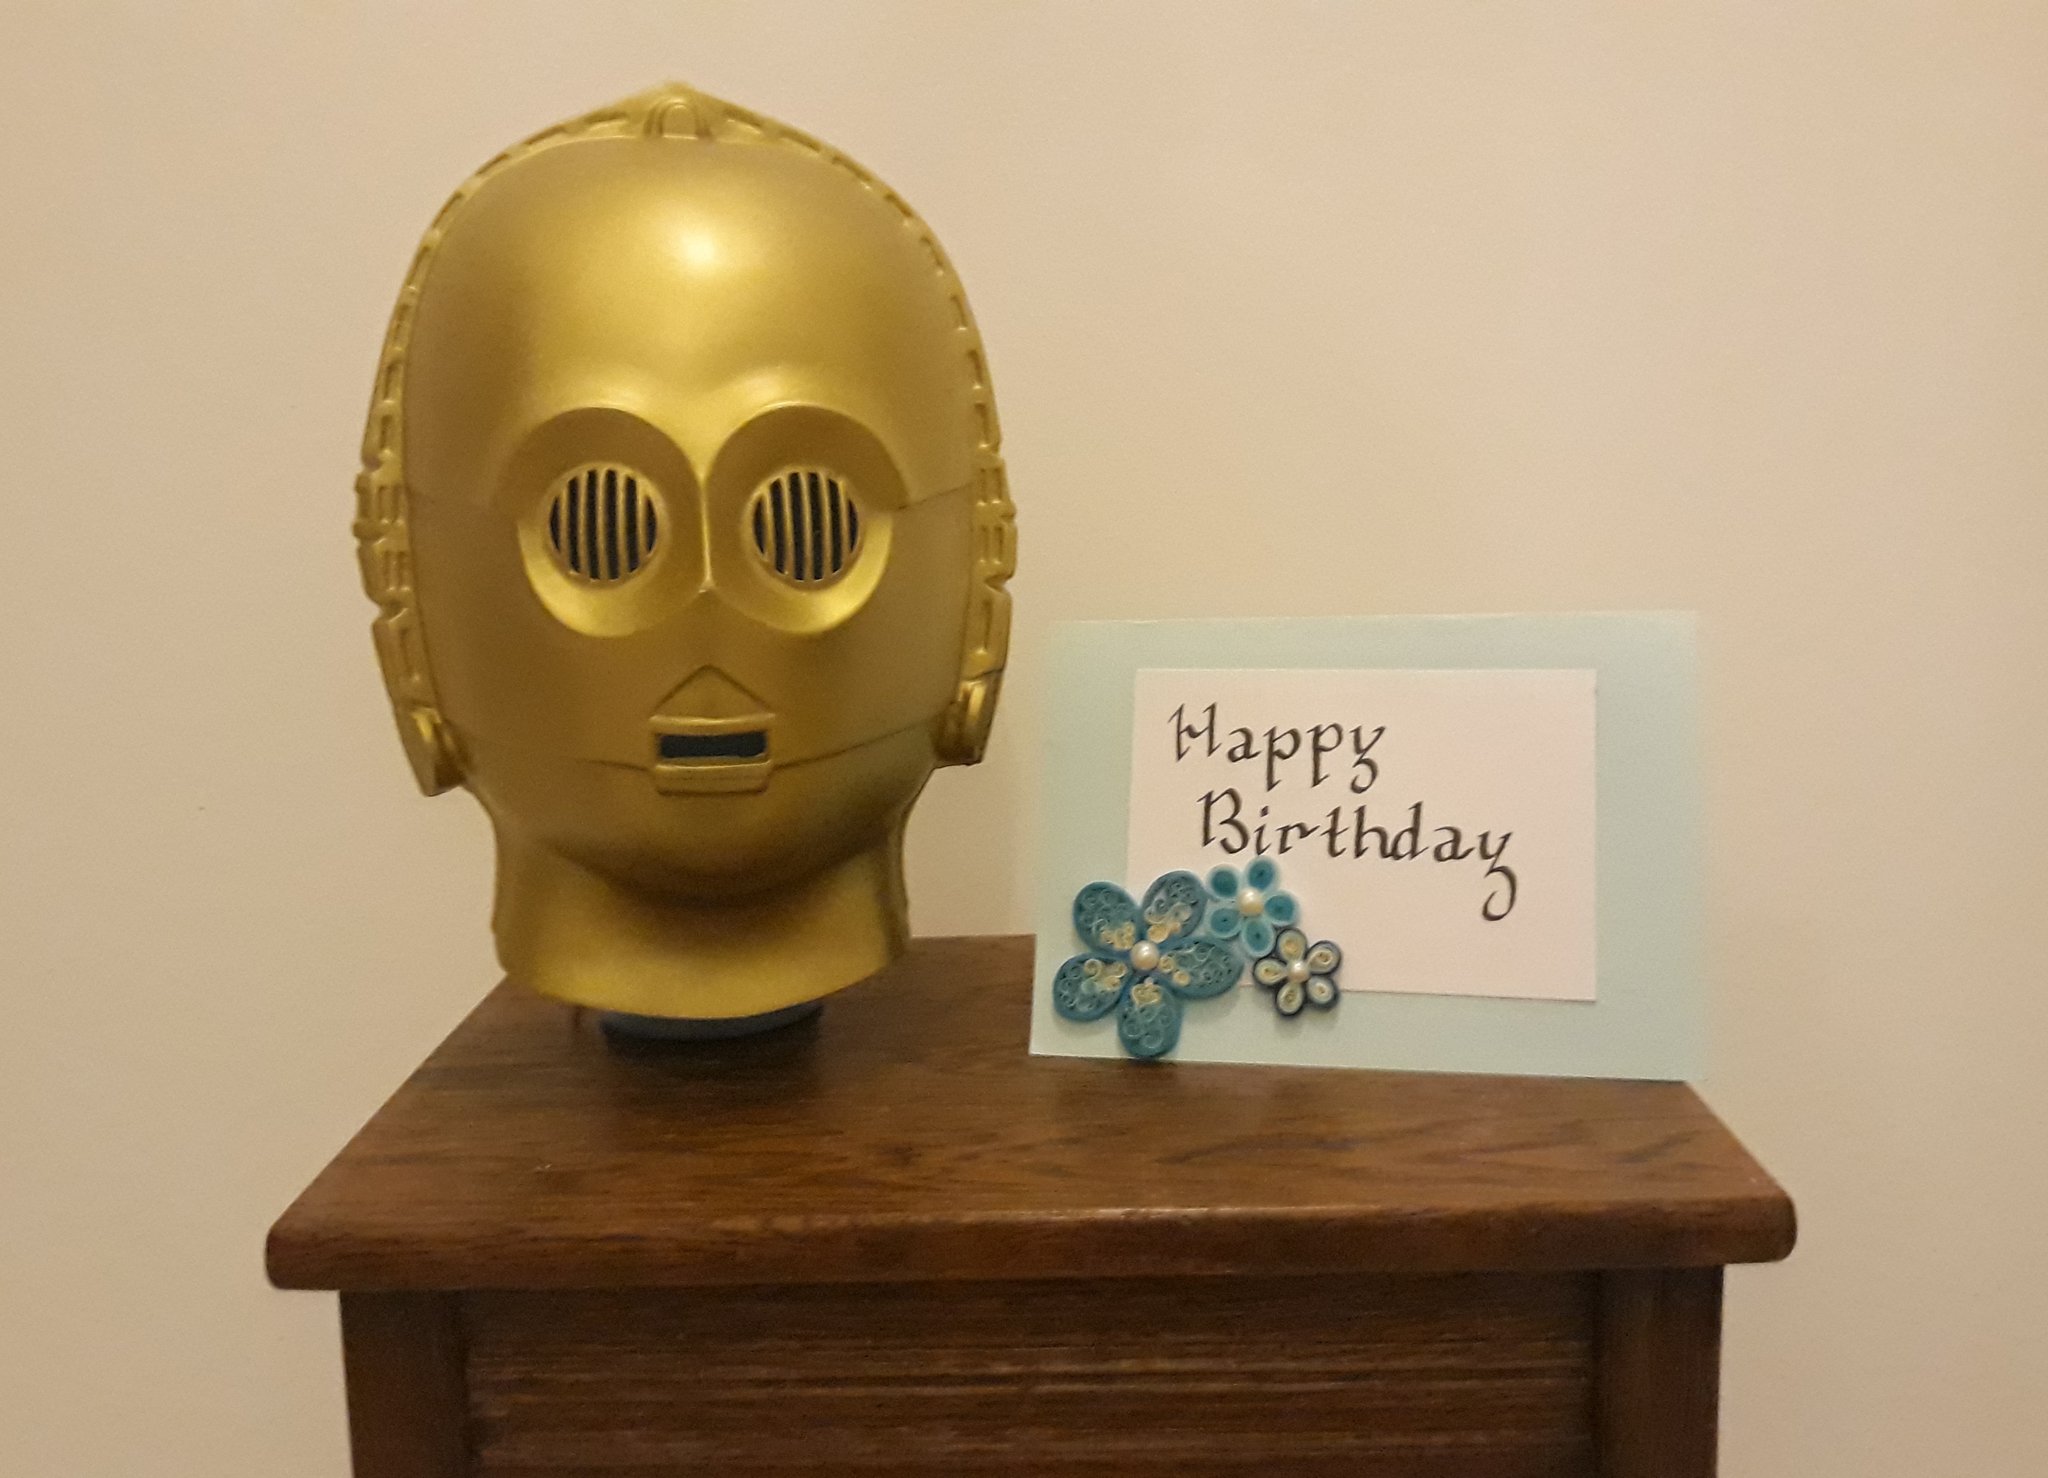   Happy Birthday Anthony Daniels and thank you for the great memories. |-o-| 
|-o-| 